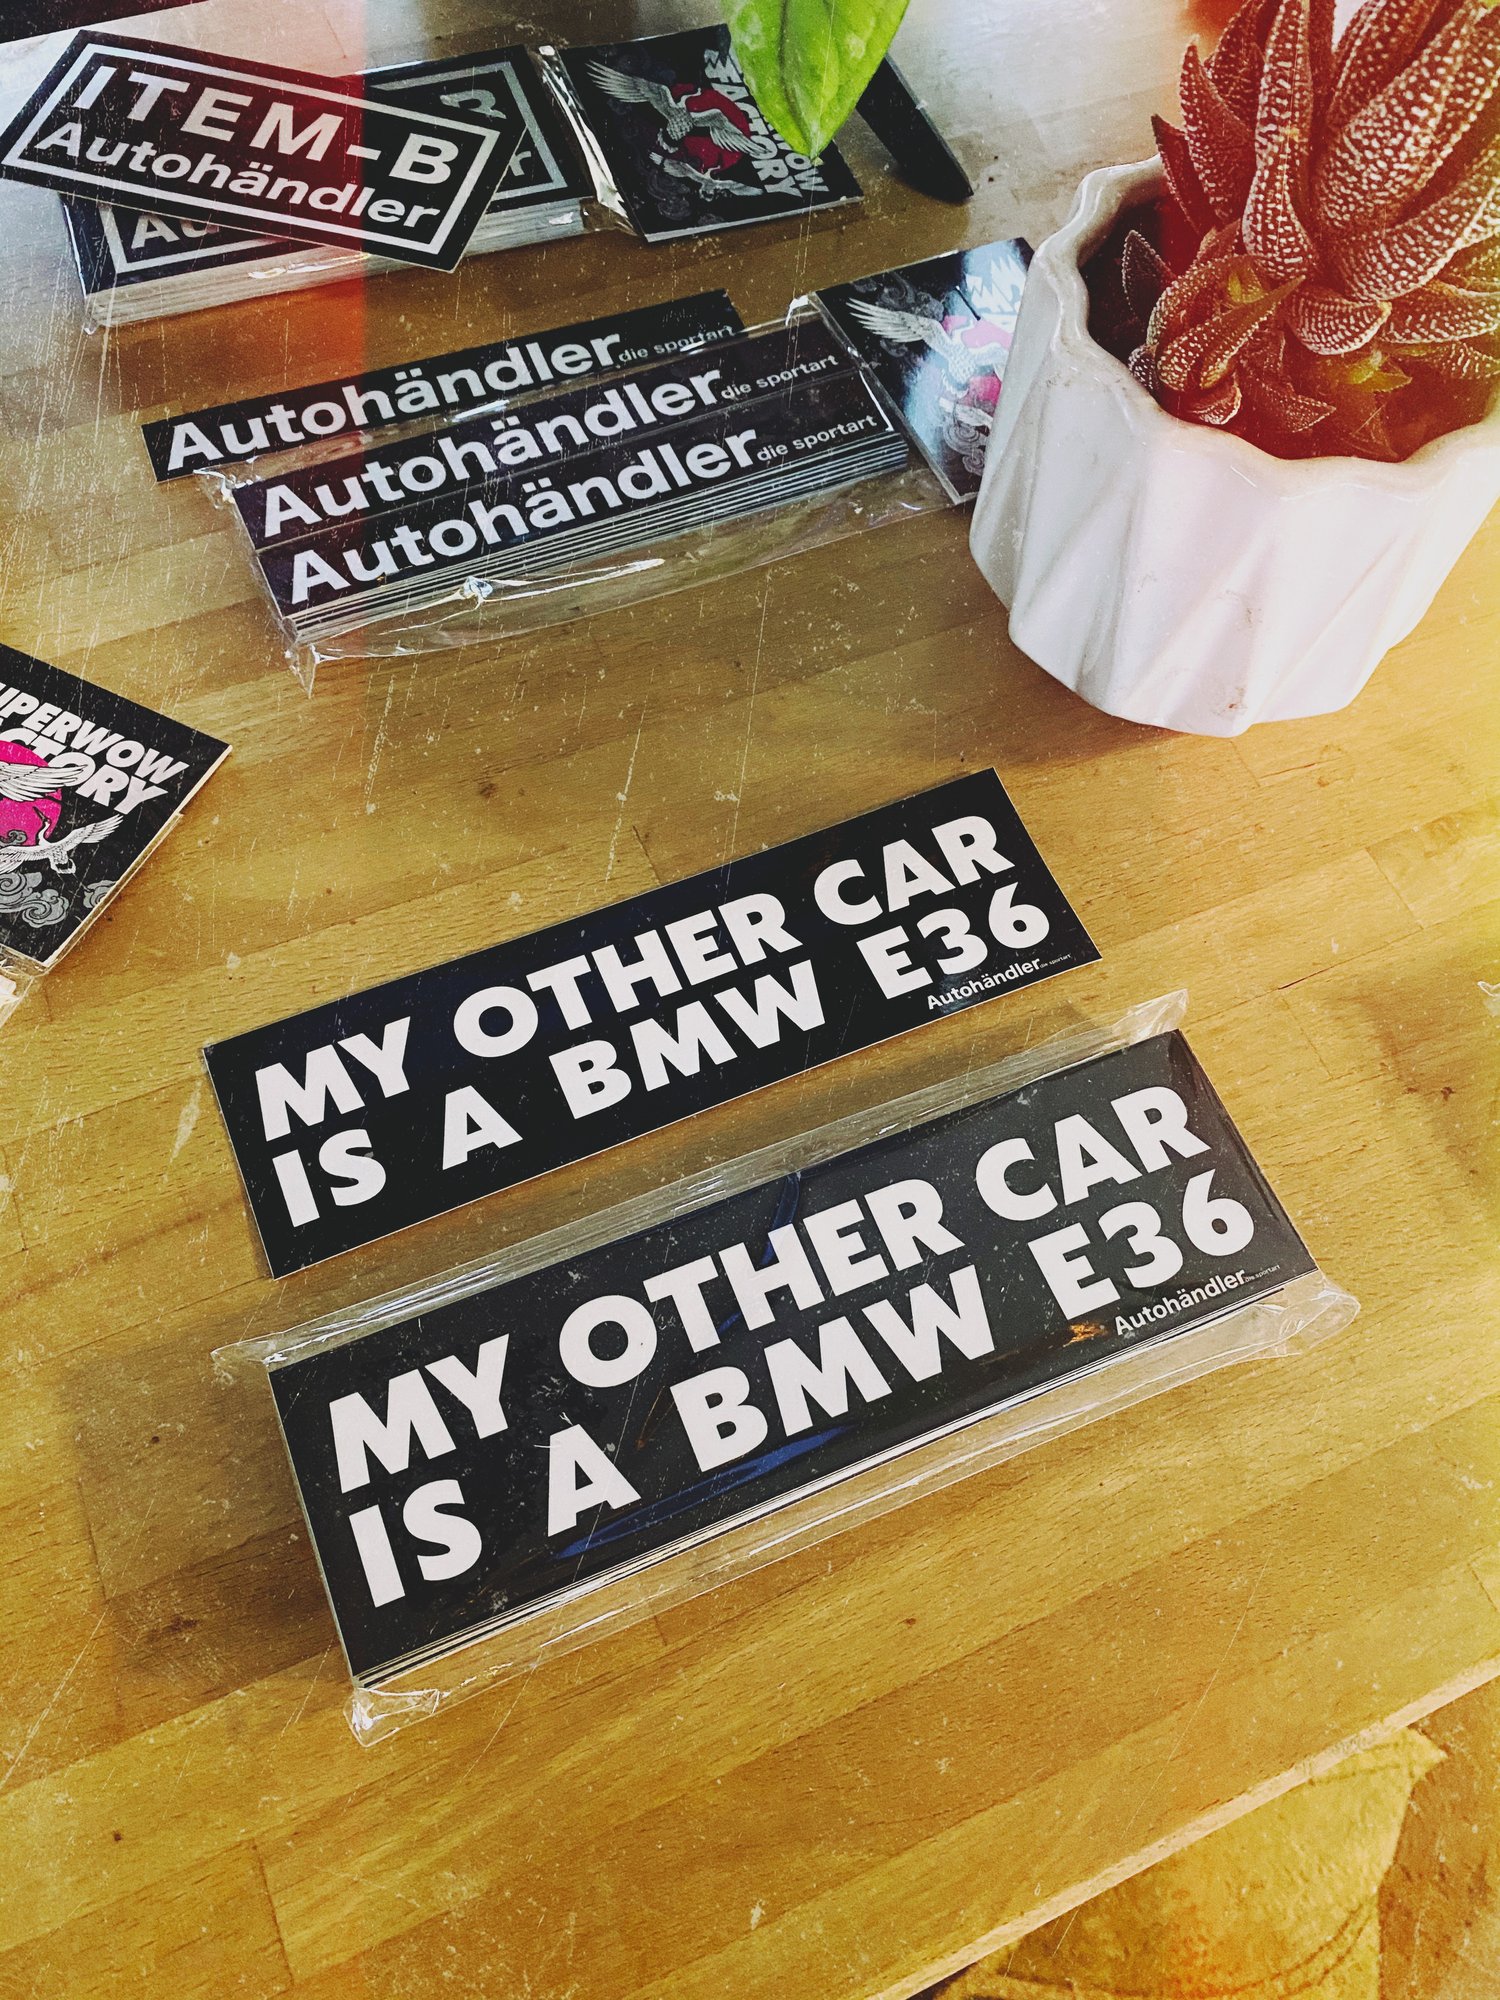 Image of Autohändler “My Other Car” Printed Slap